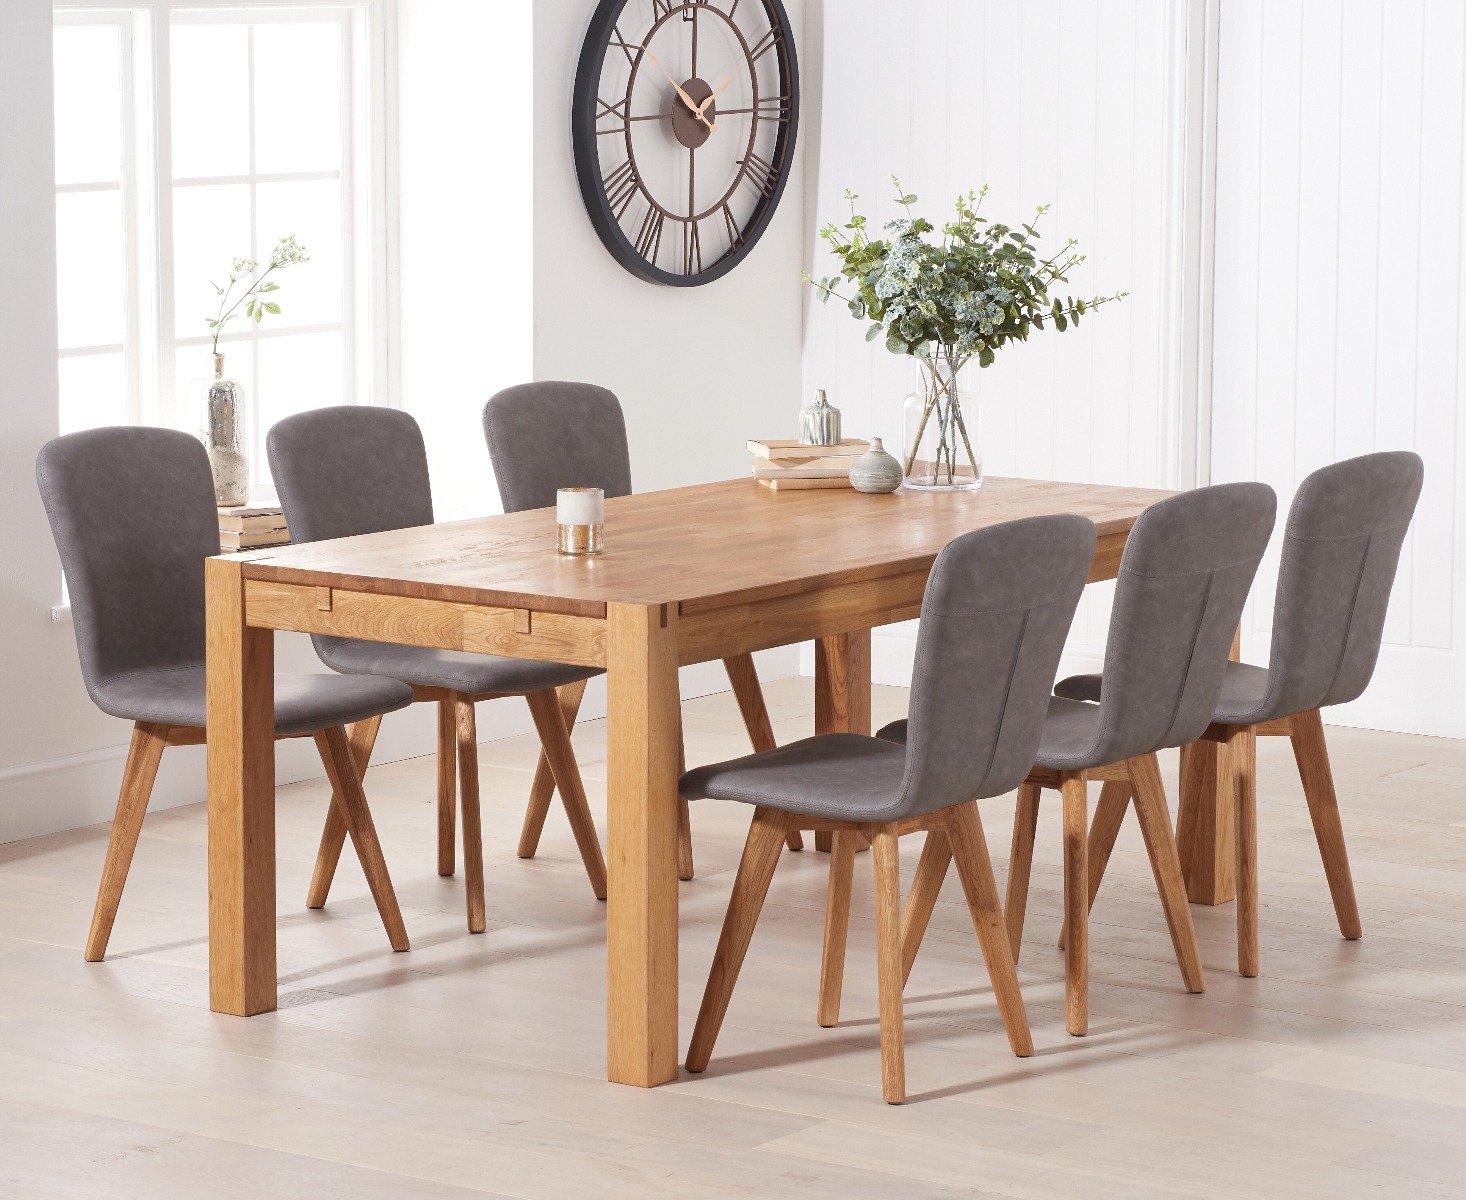 Thetford 150cm Oak Dining Table With 4 Grey Ruben Chairs